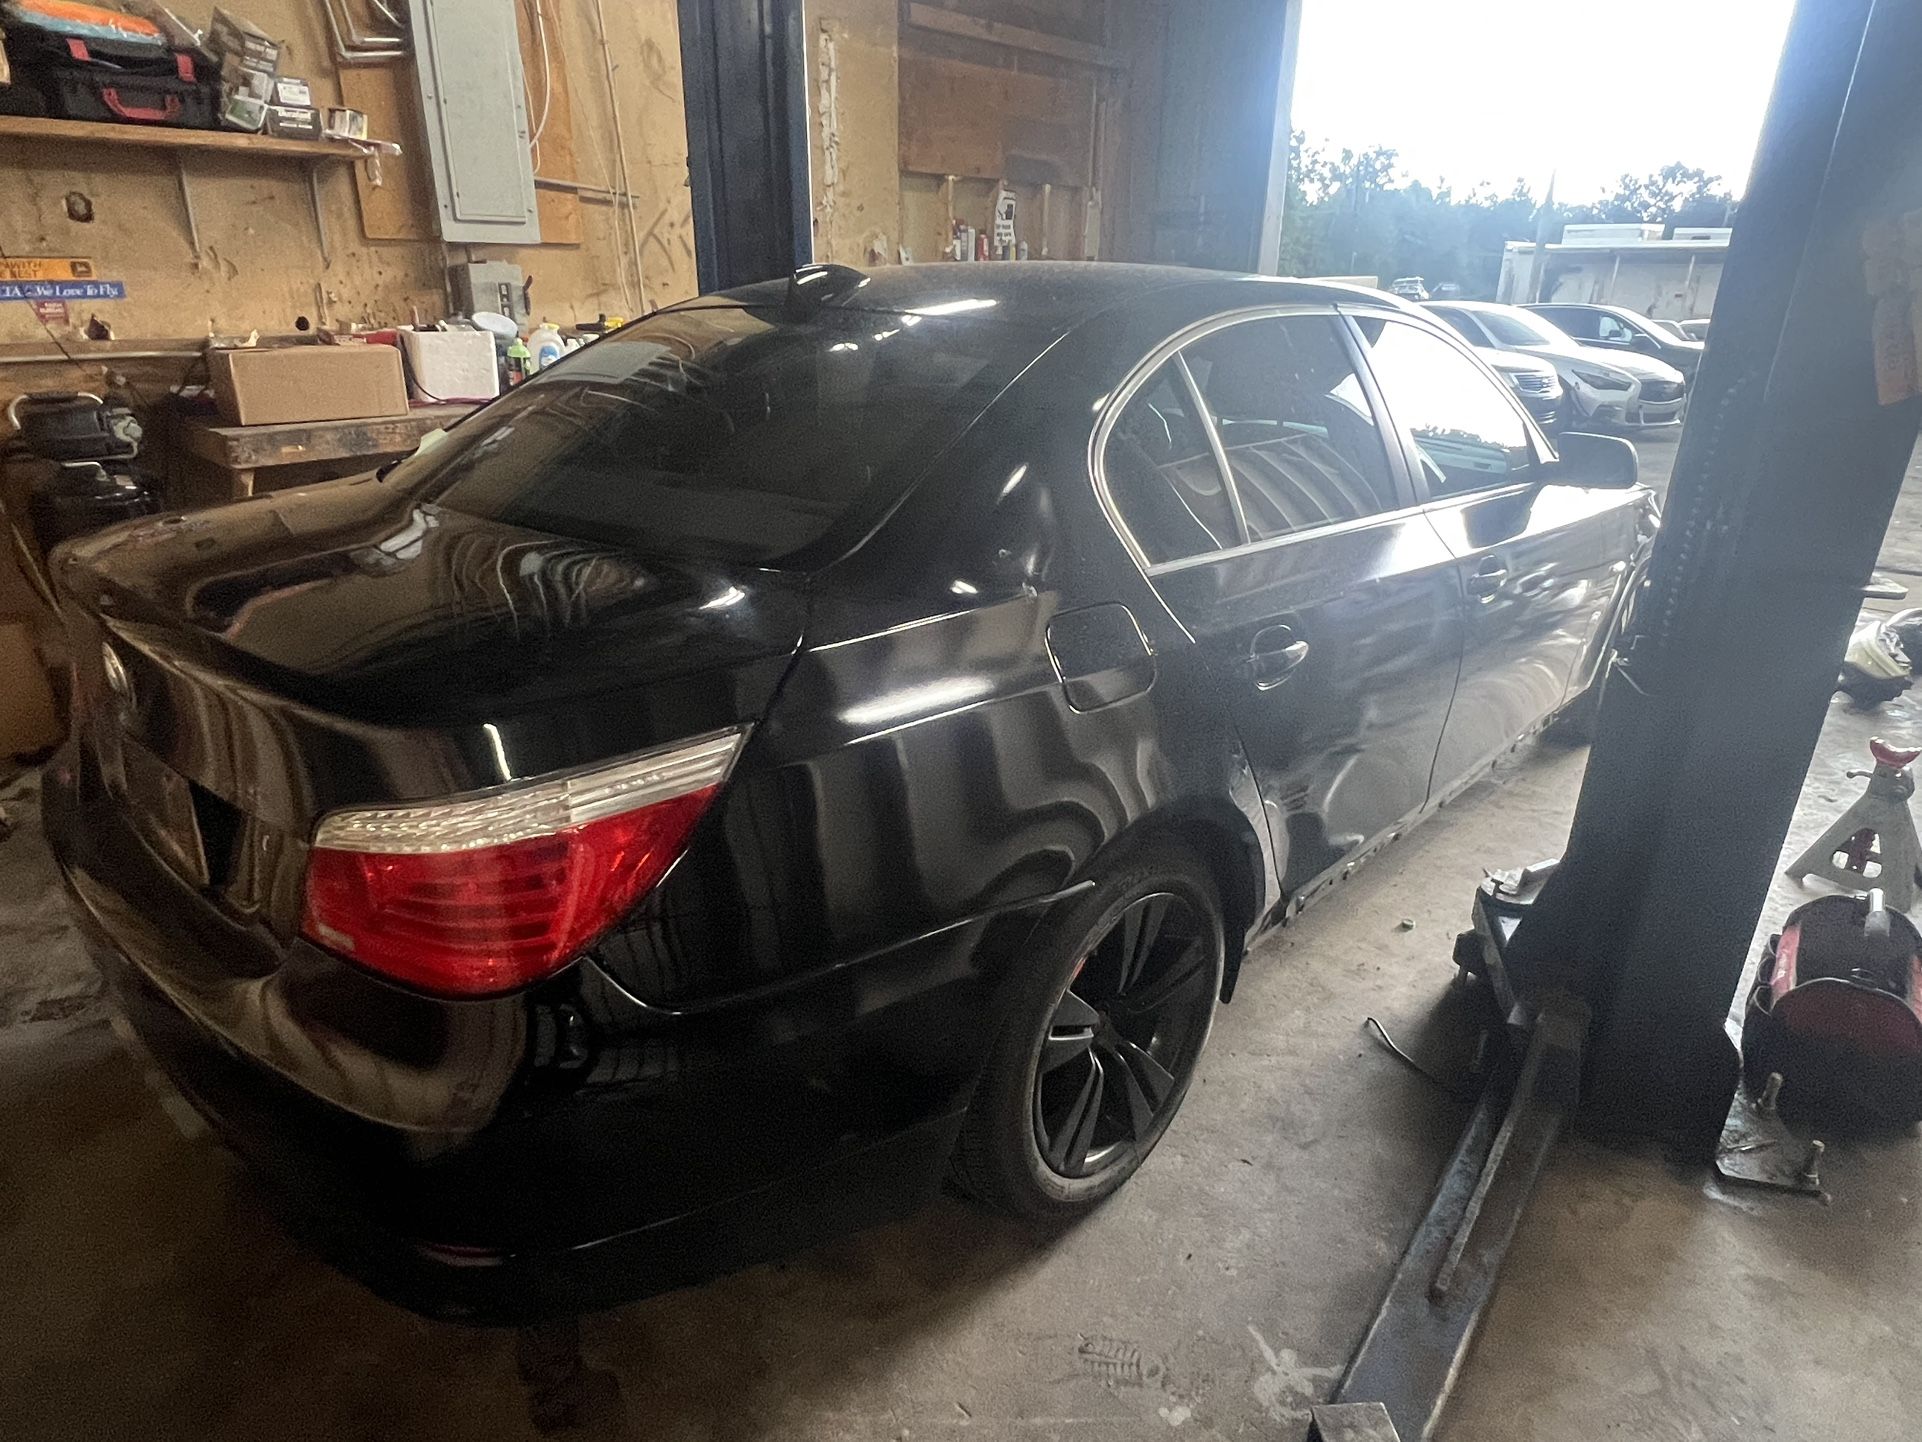 08 Bmw 528i. Clean Title. Whole Car Or Part Out